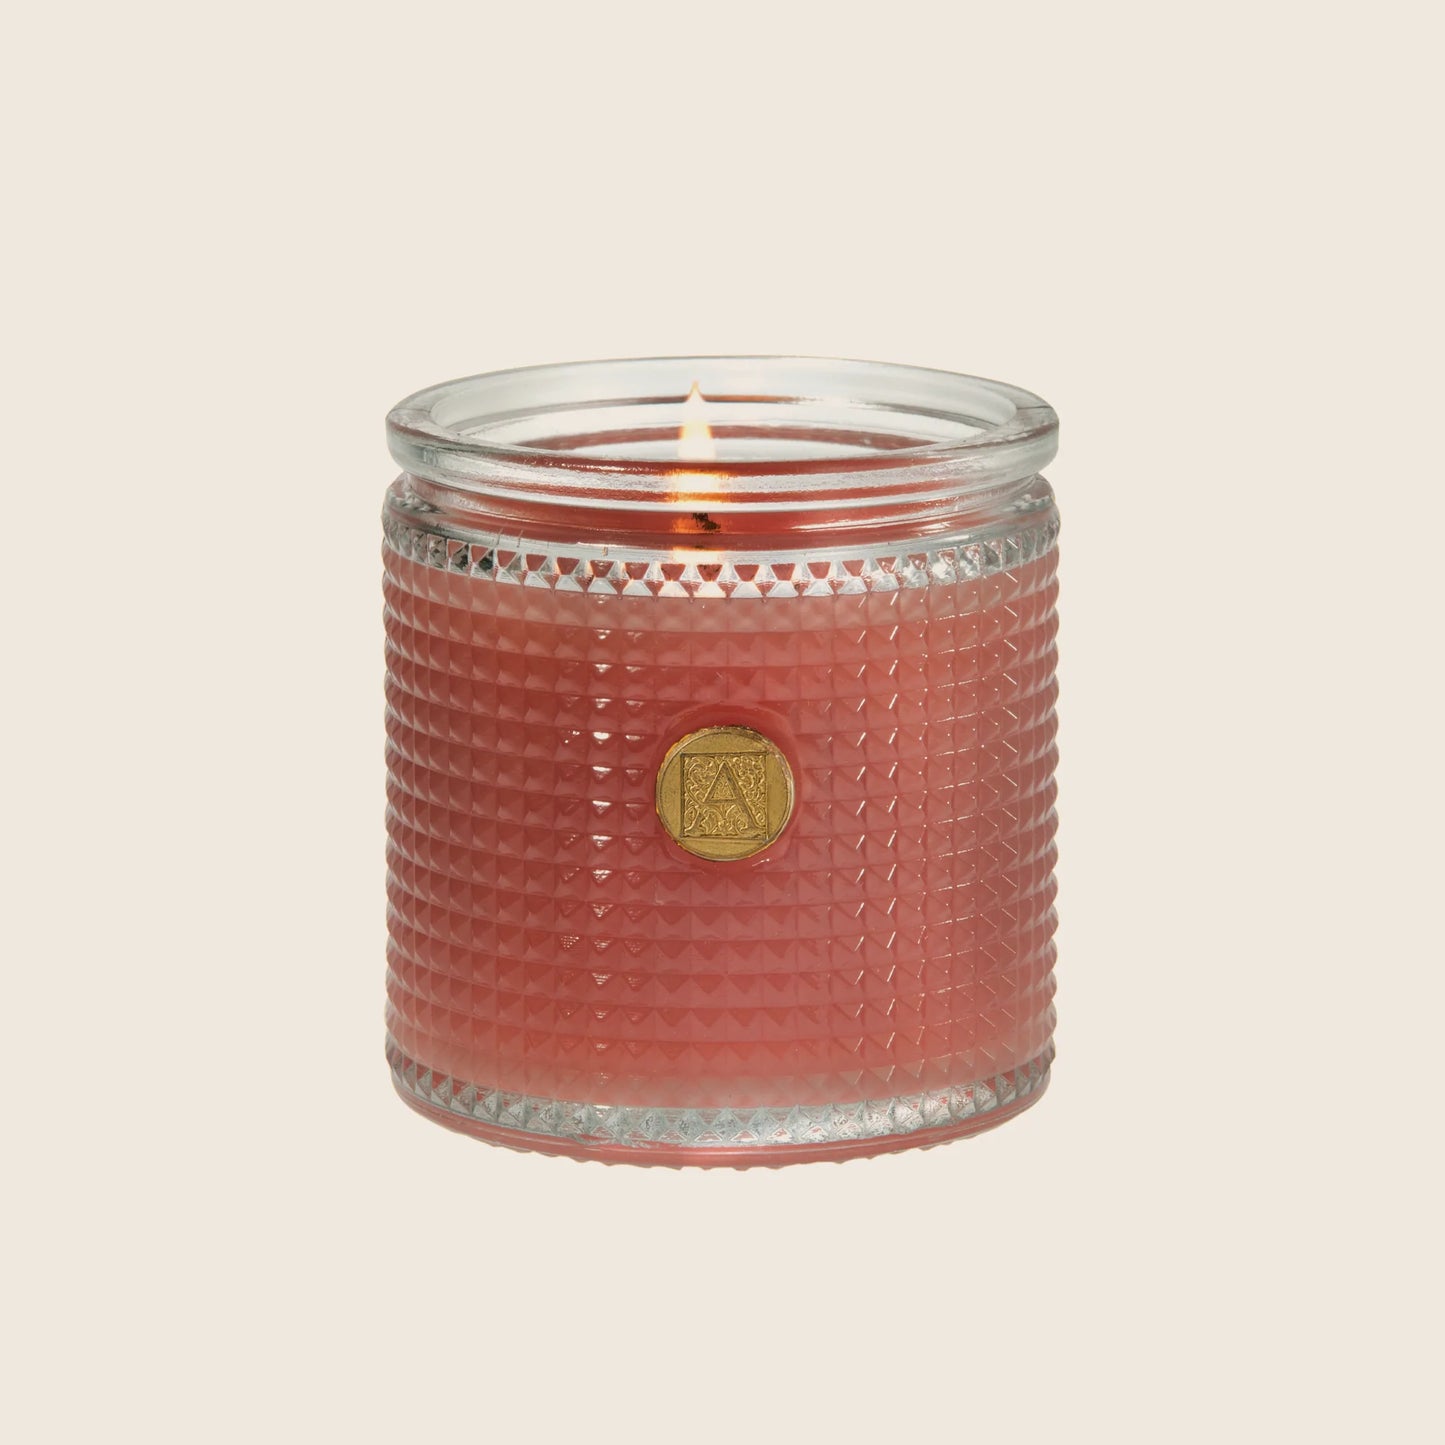 Load image into Gallery viewer, Pomelo Pomegranate - Textured Glass Candle
